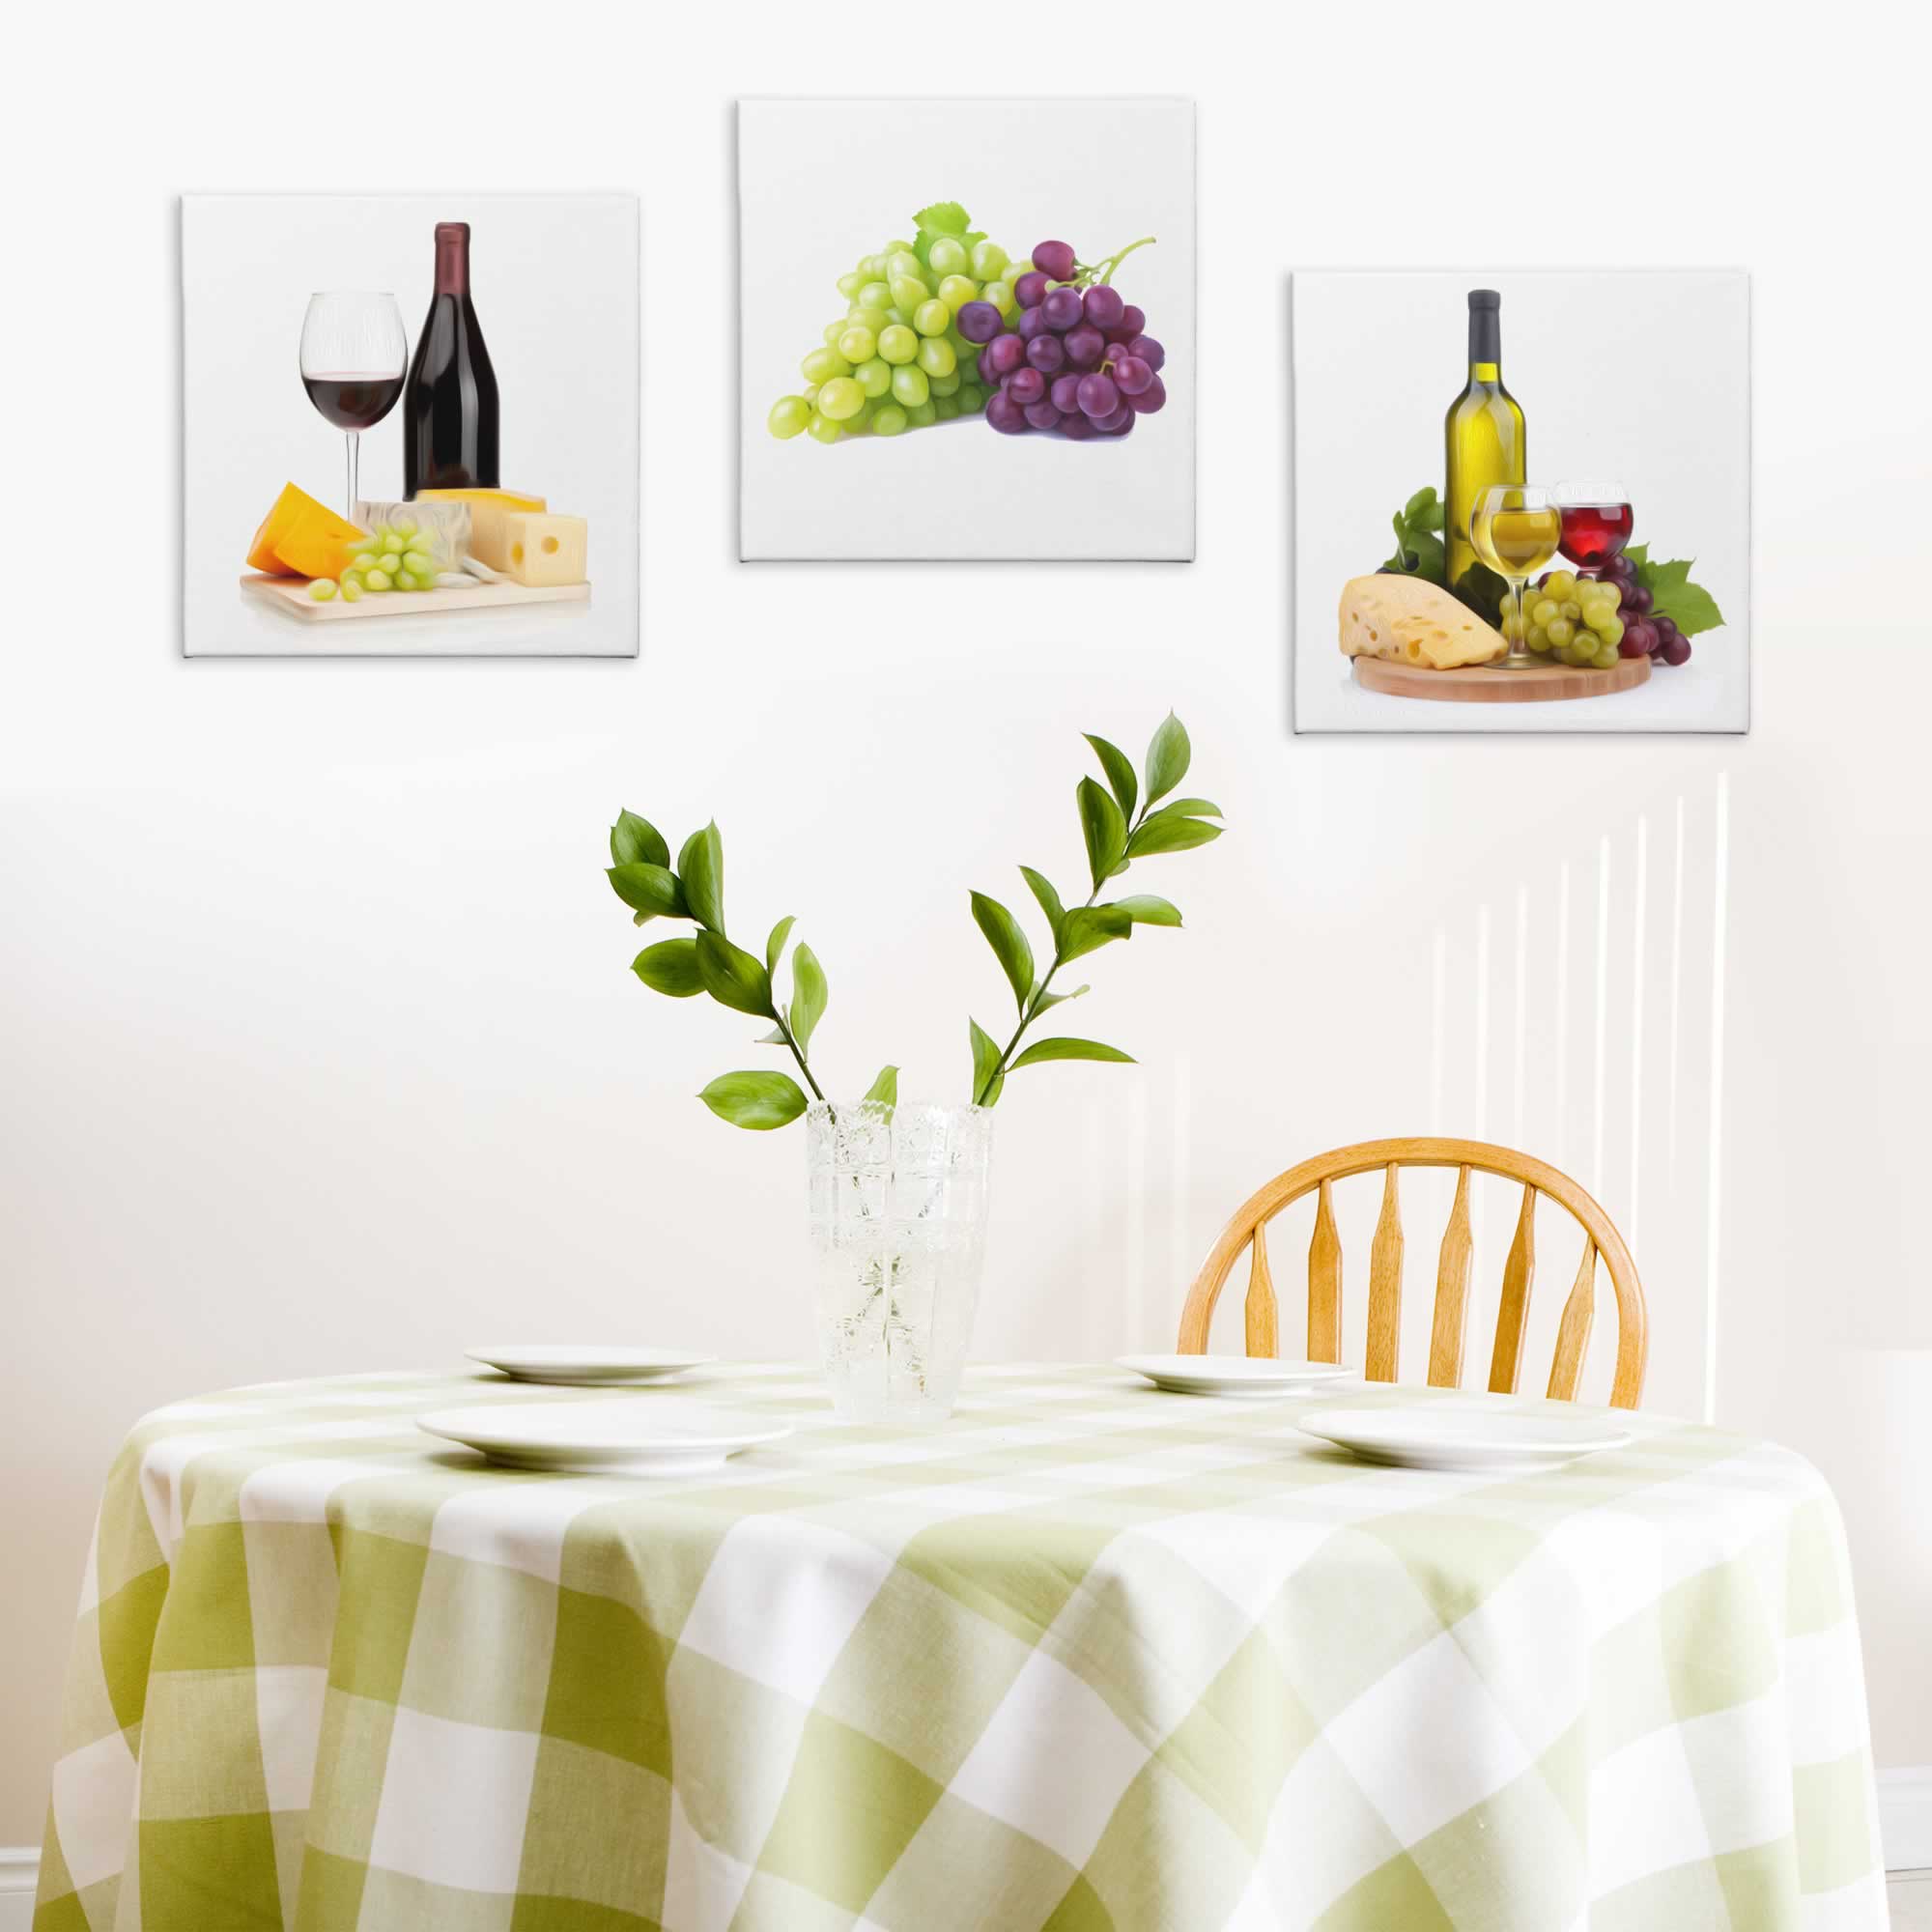 Wine and Cheese - Contemporary giclee Painting Print on Canvas - Lifestyle Image